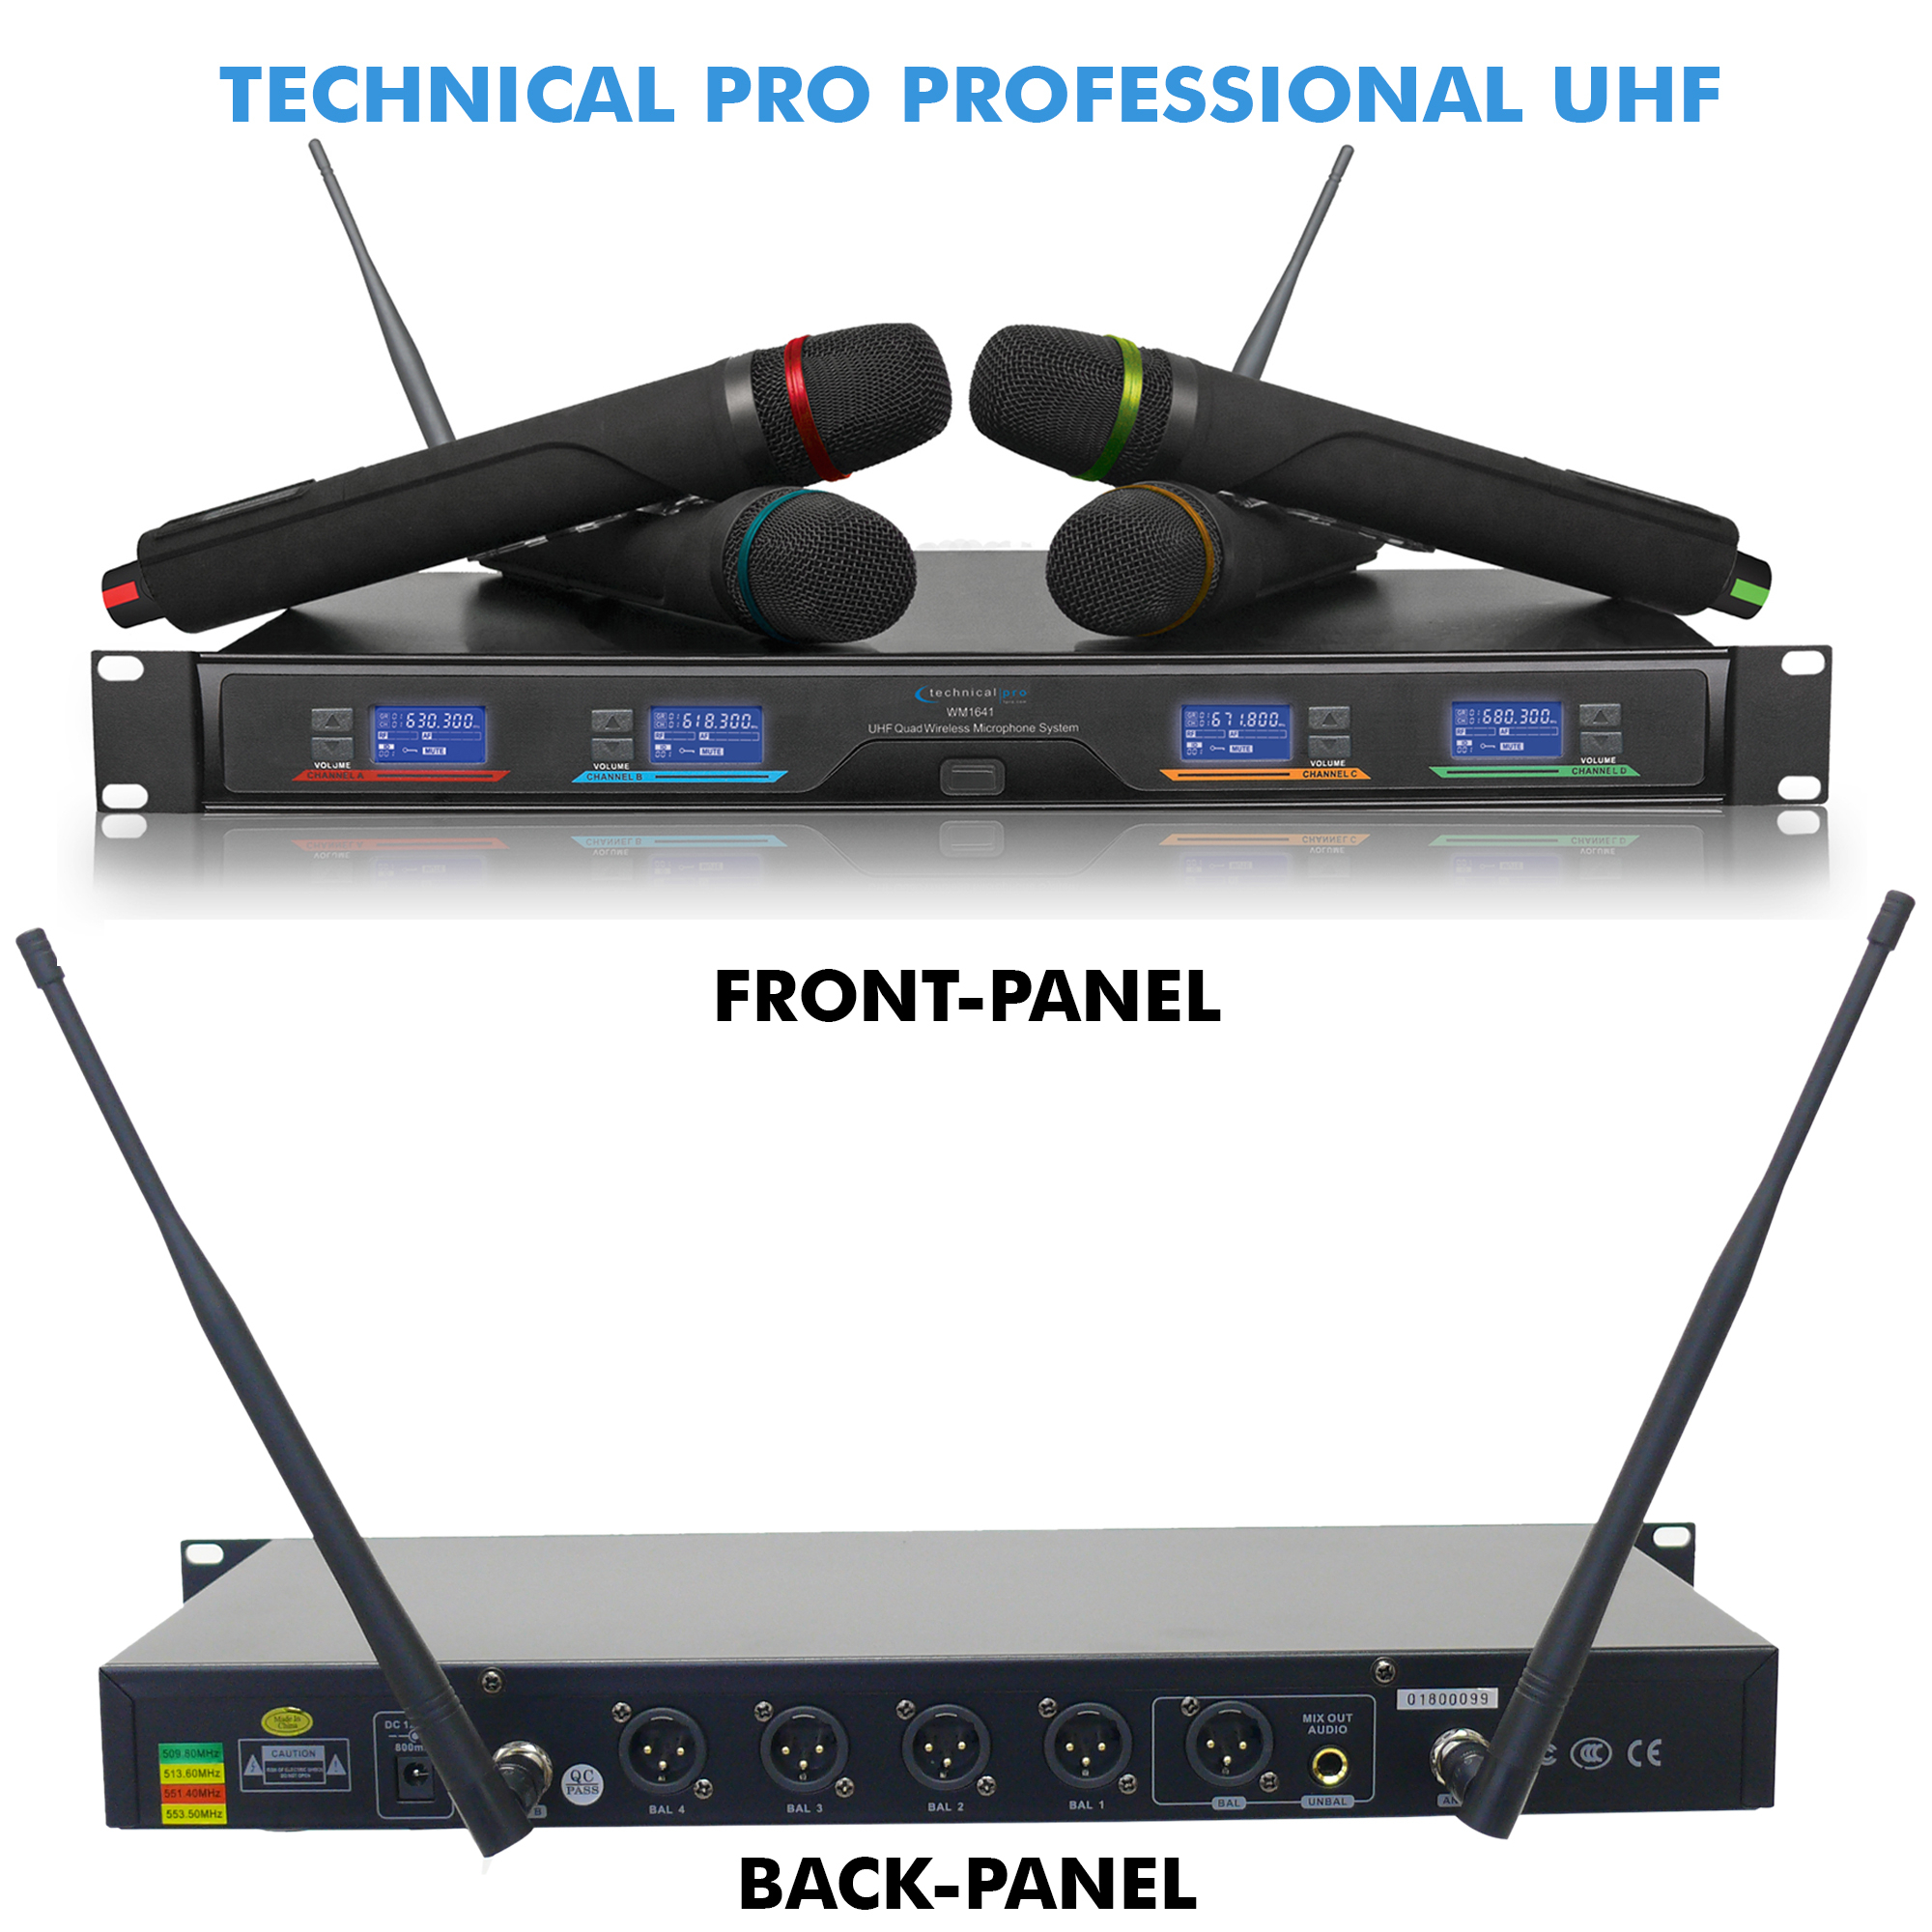 Technical Pro Professional UHF Quad Wireless Microphone System, Mic Set With Four Handheld UHF Wireless Microphone, Individual XLR Outputs